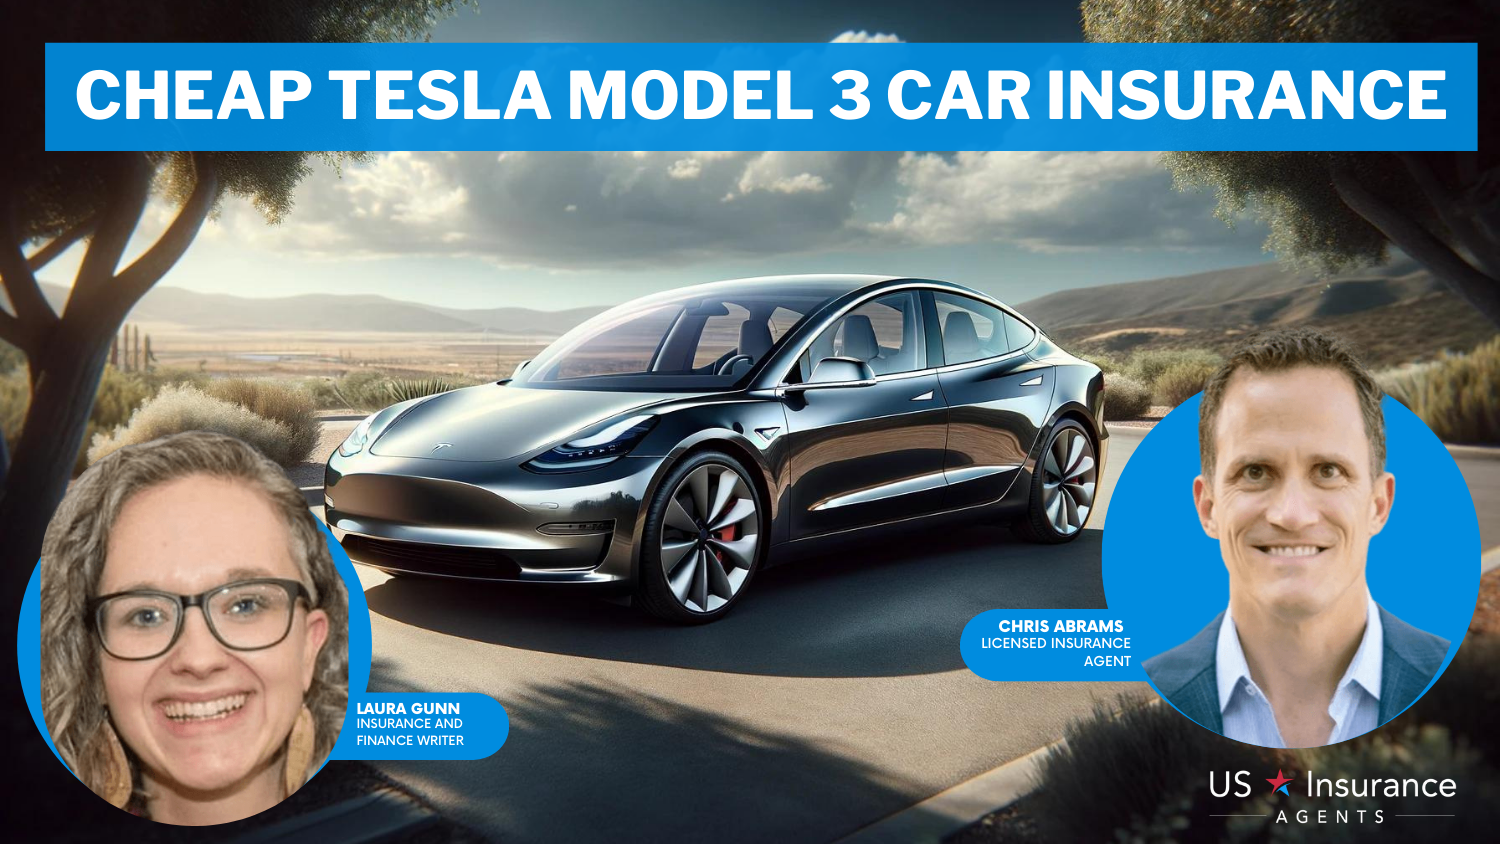 Cheap Tesla Model 3 Car Insurance: State Farm, Nationwide, and USAA